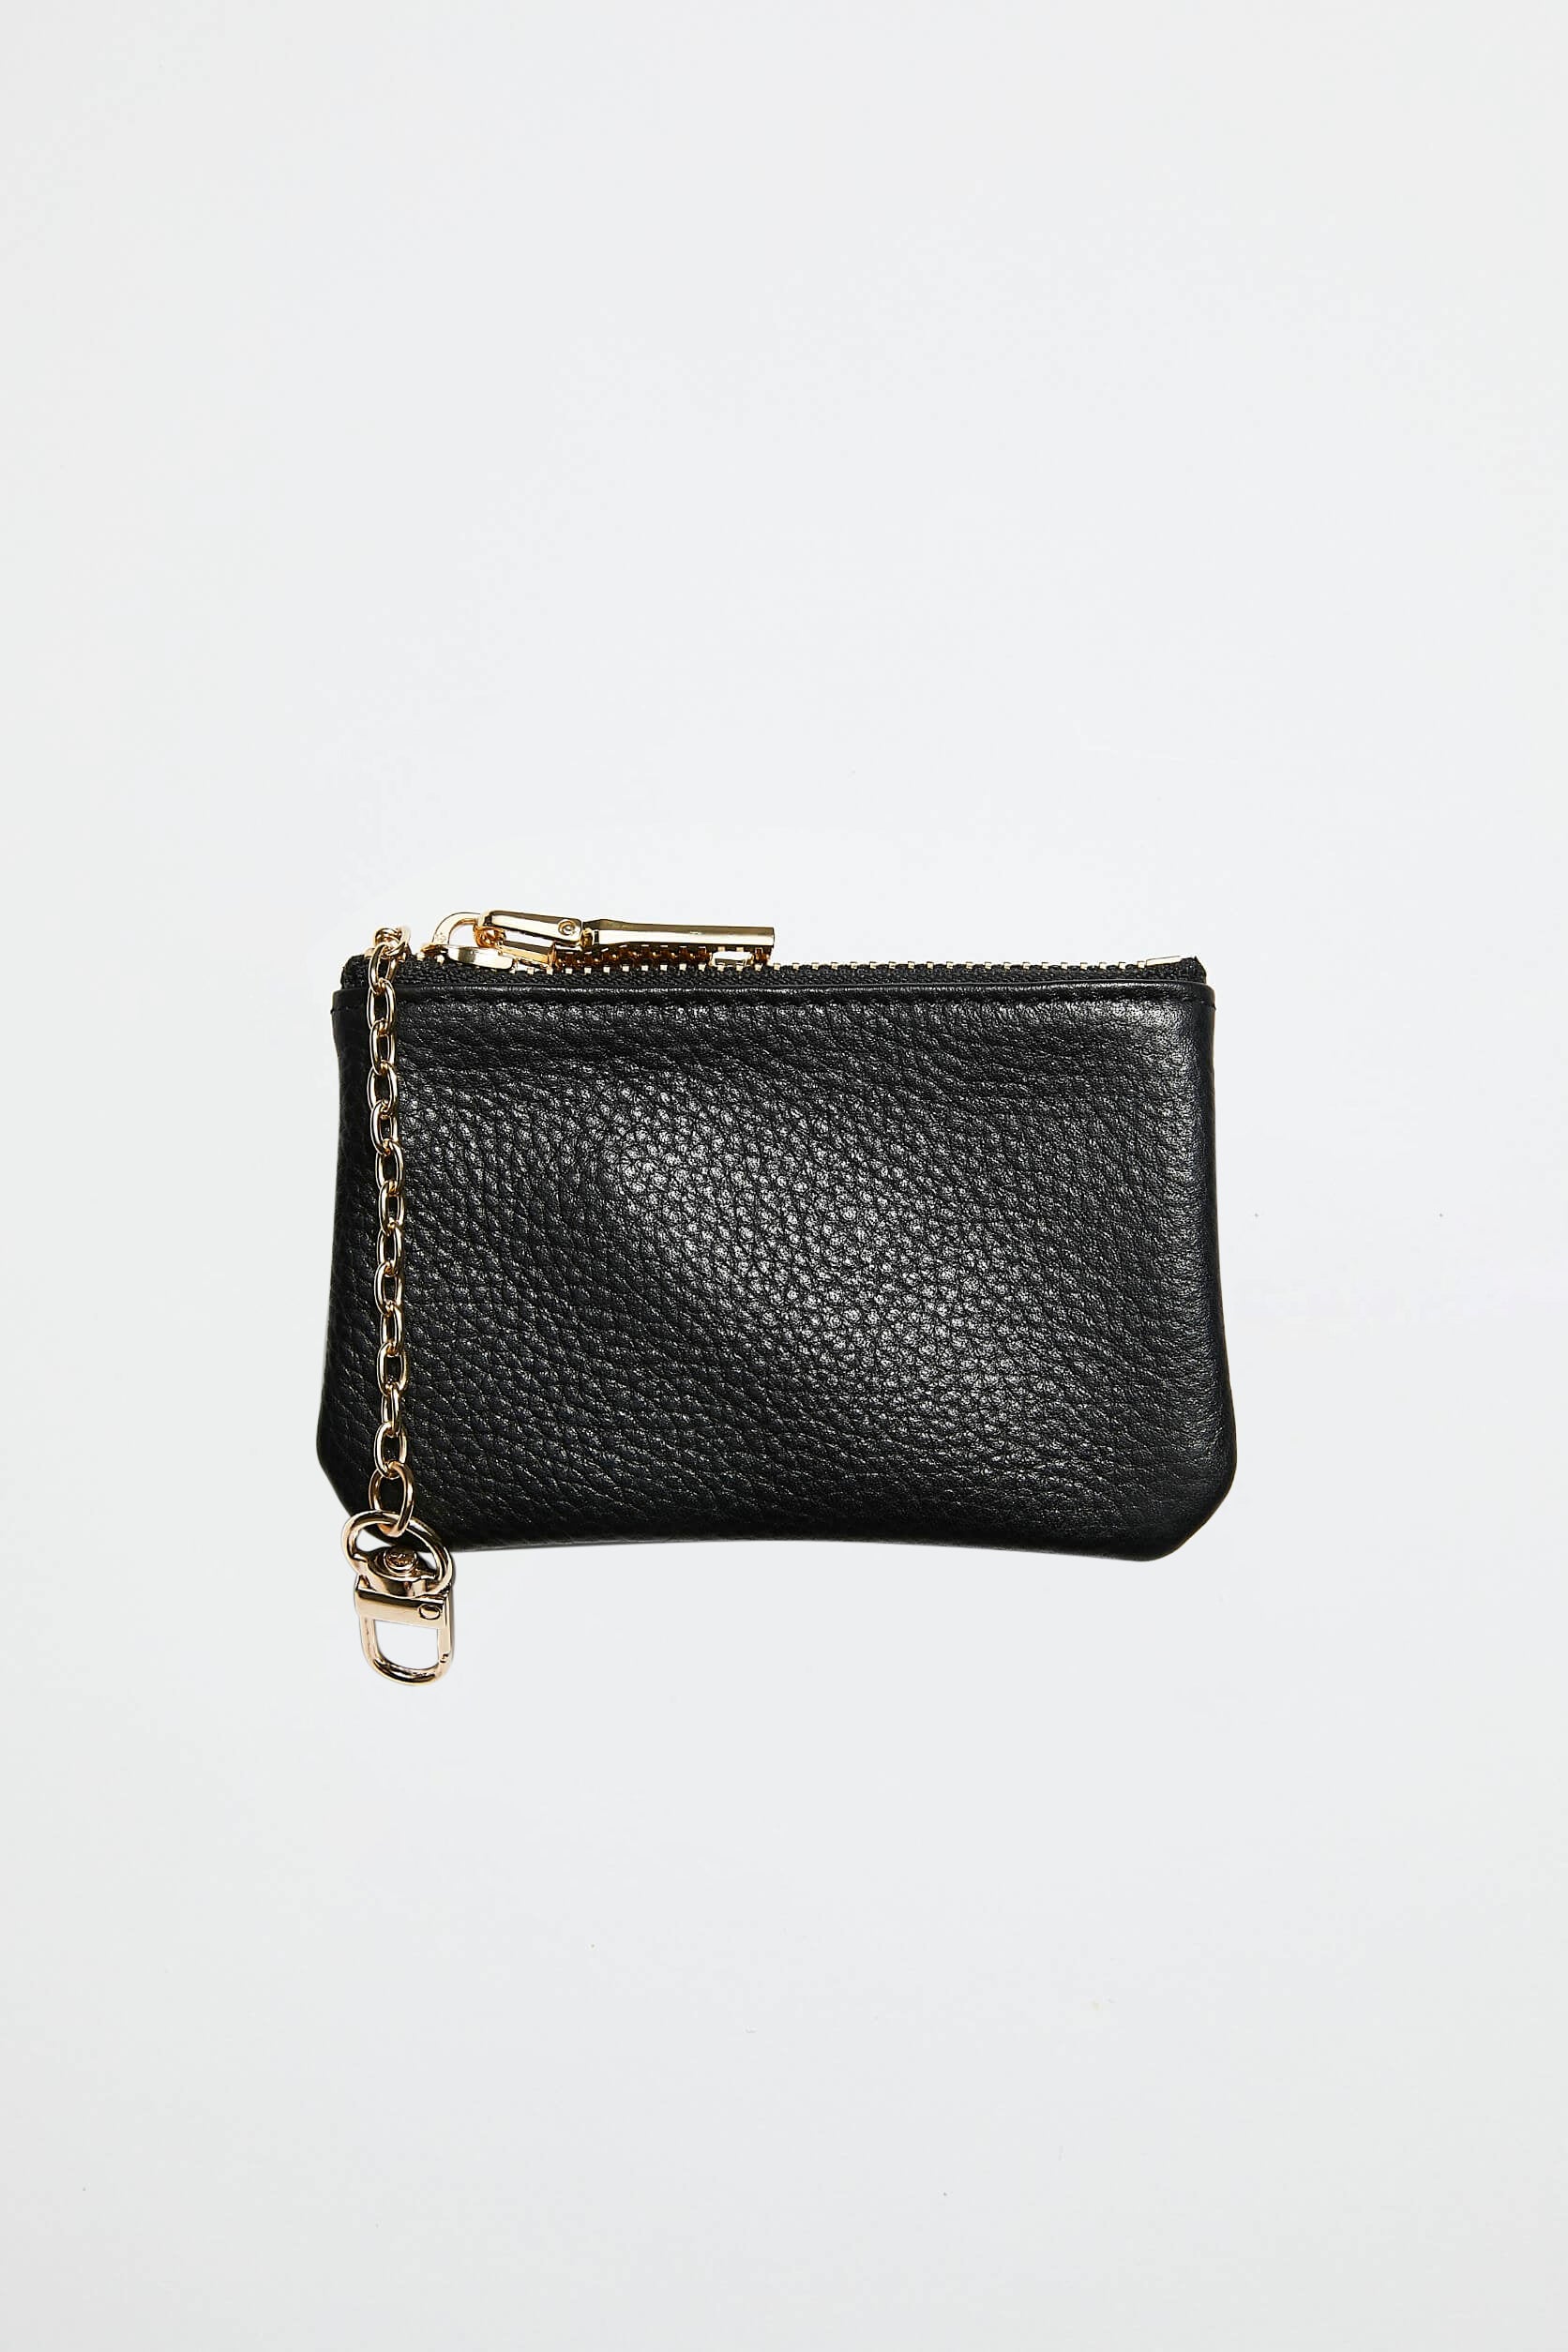 Leather Coin Purse | Black Gold